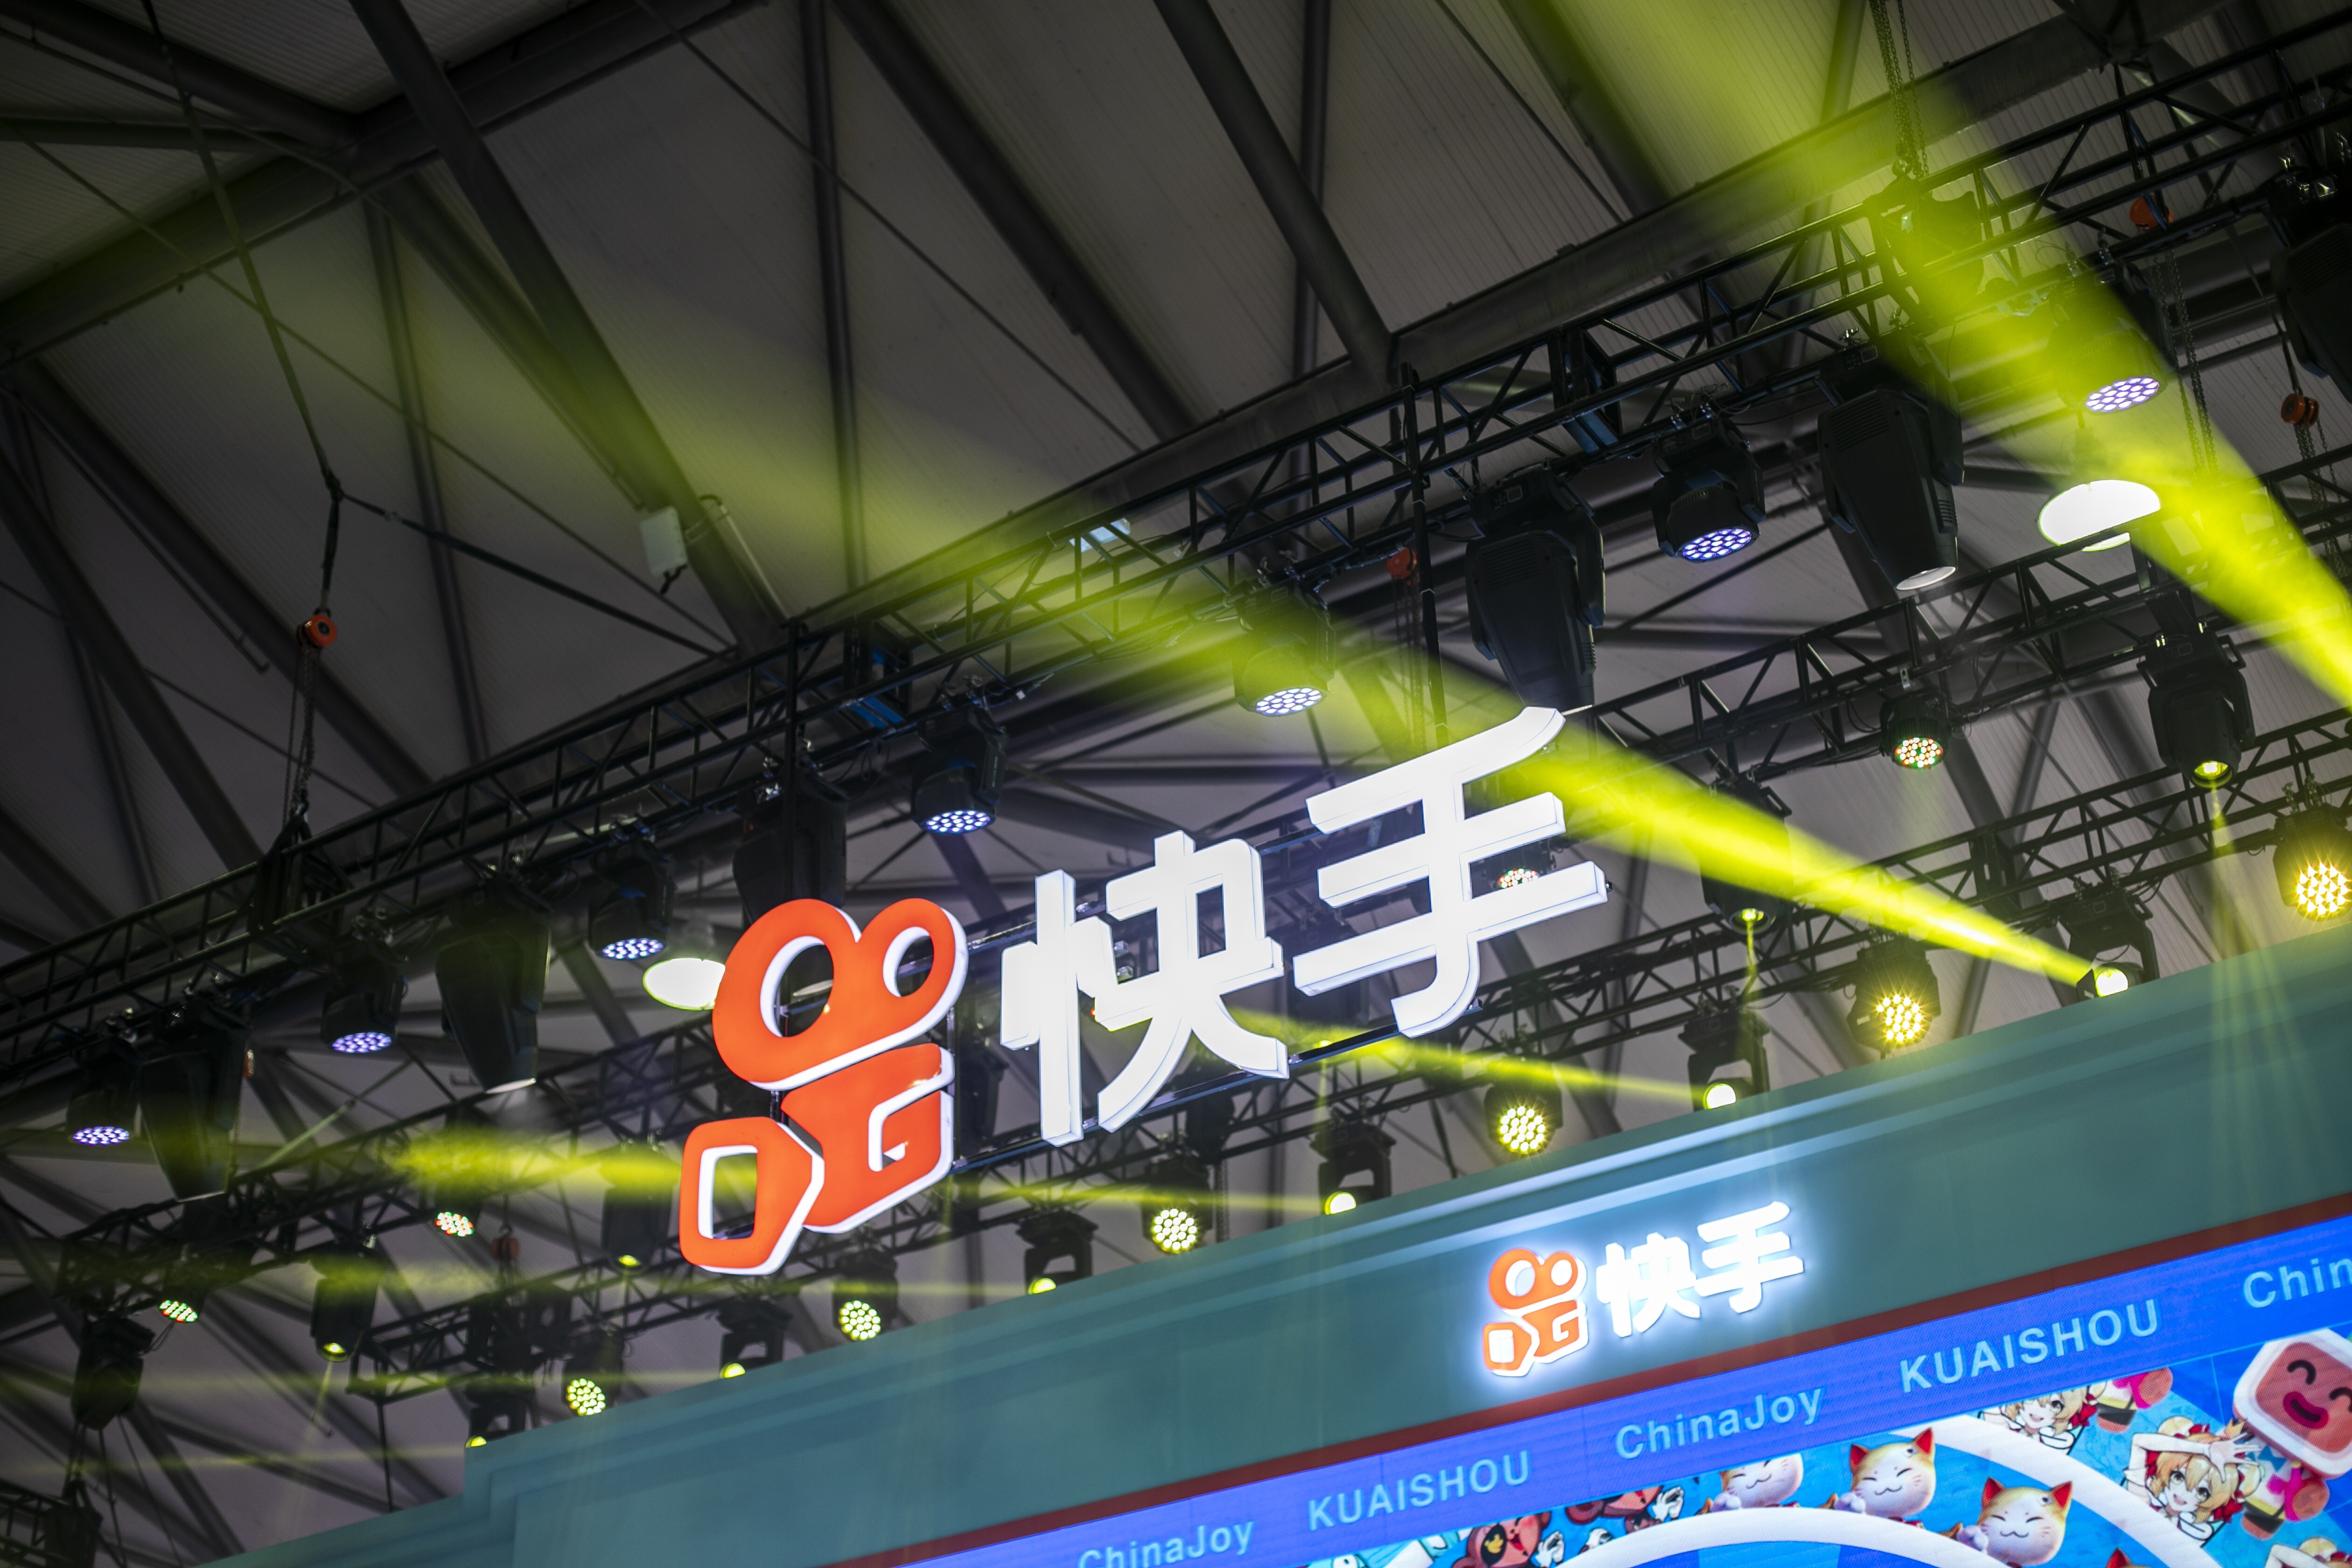 The short video-sharing platform Kuaishou stand is seen one day before the 2020 China Digital Entertainment Expo & Conference (ChinaJoy) at Shanghai New International Expo Center on July 30, 2020. Photo: Getty